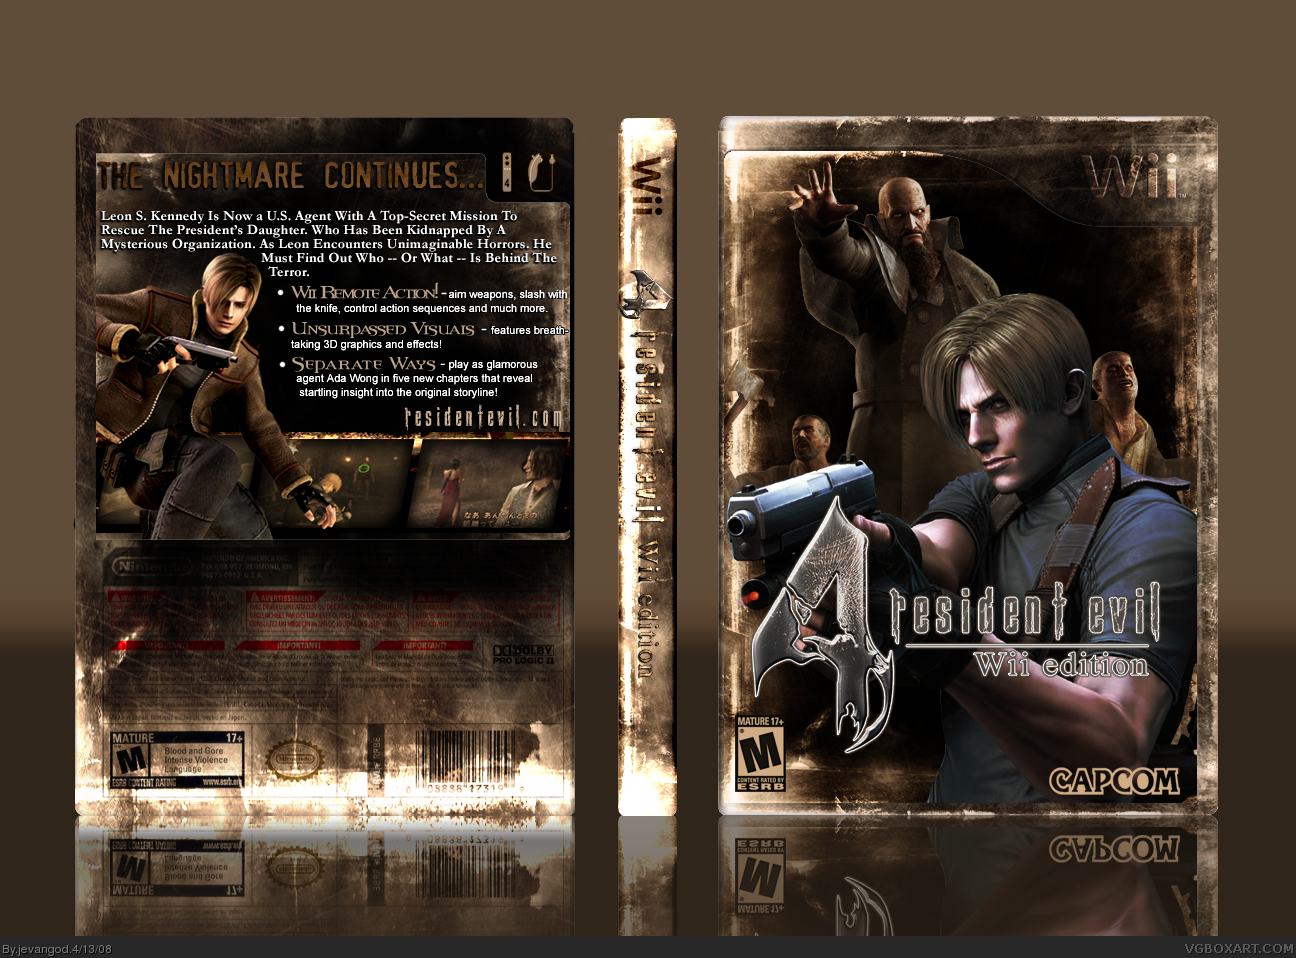 Resident Evil 4: Wii Edition box cover